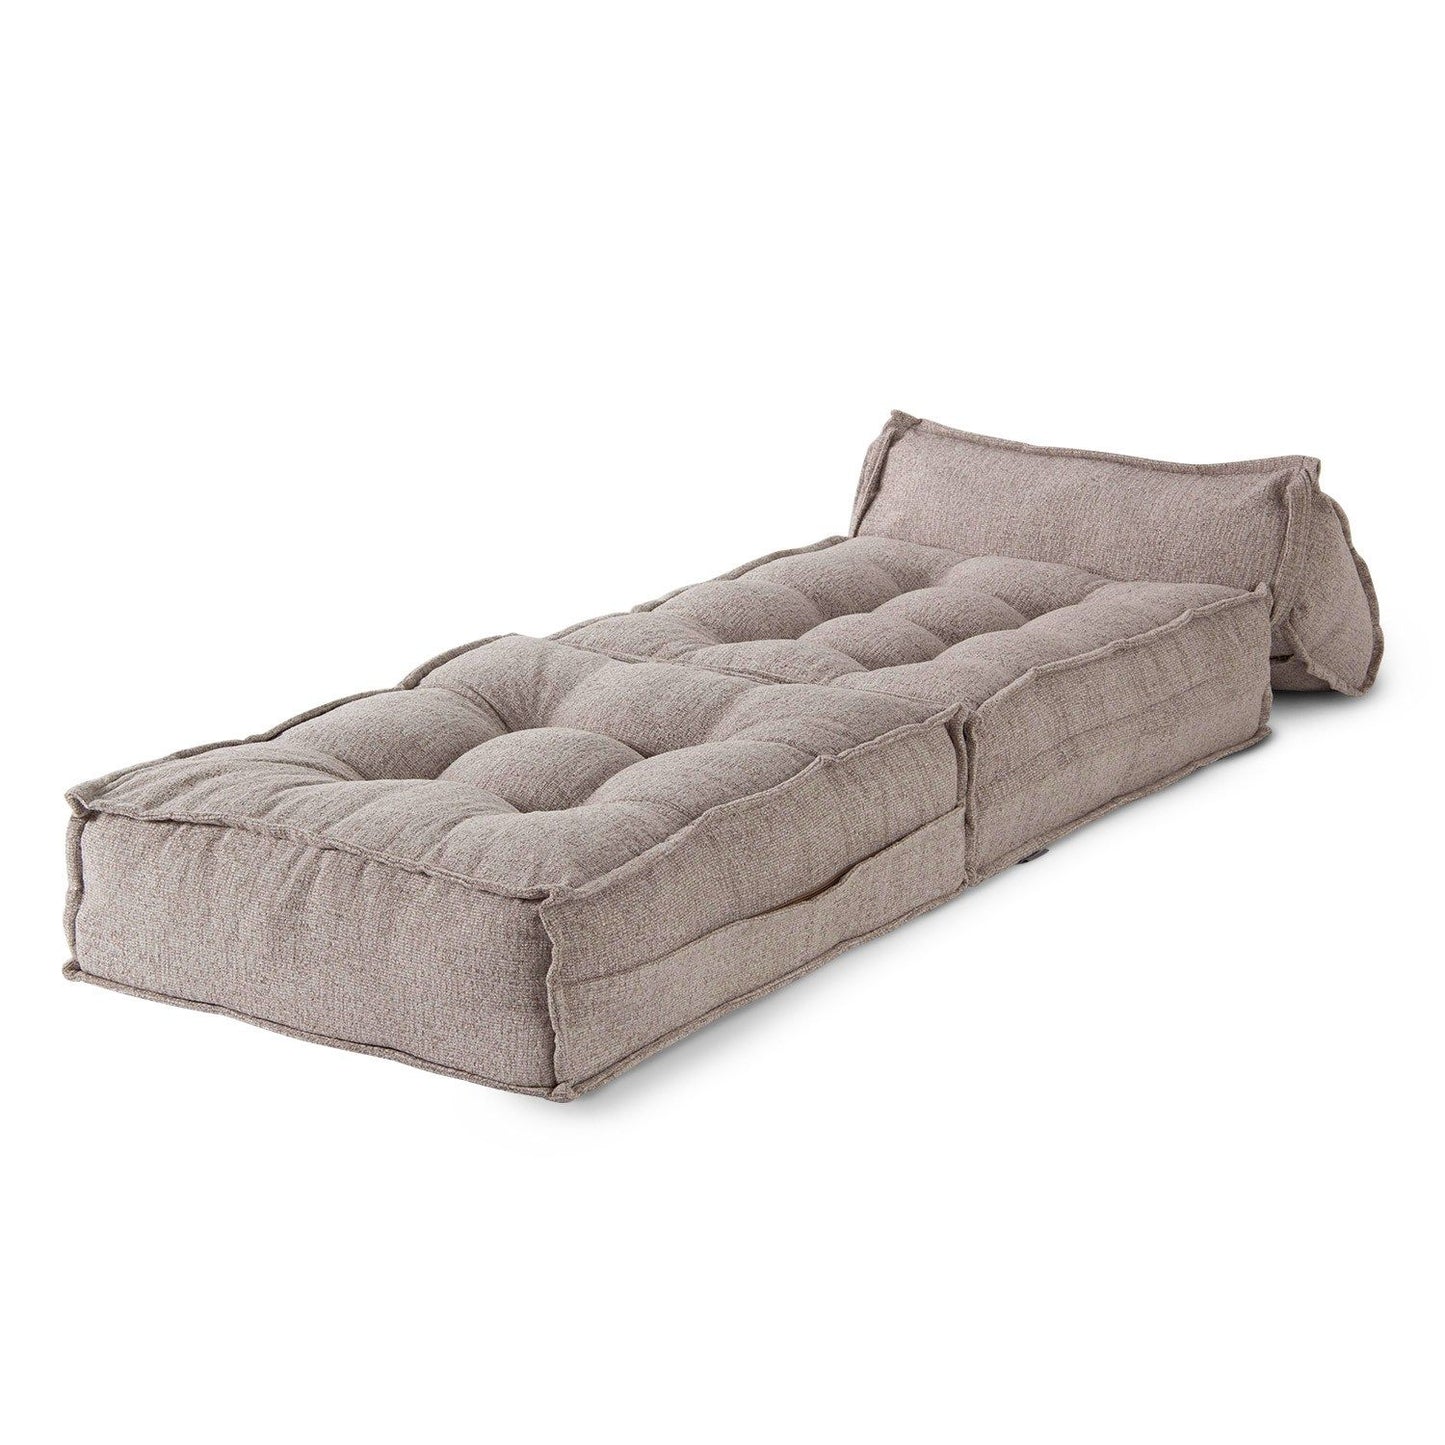 Mocca - Light Brown - 1-Seat Sofa-Bed